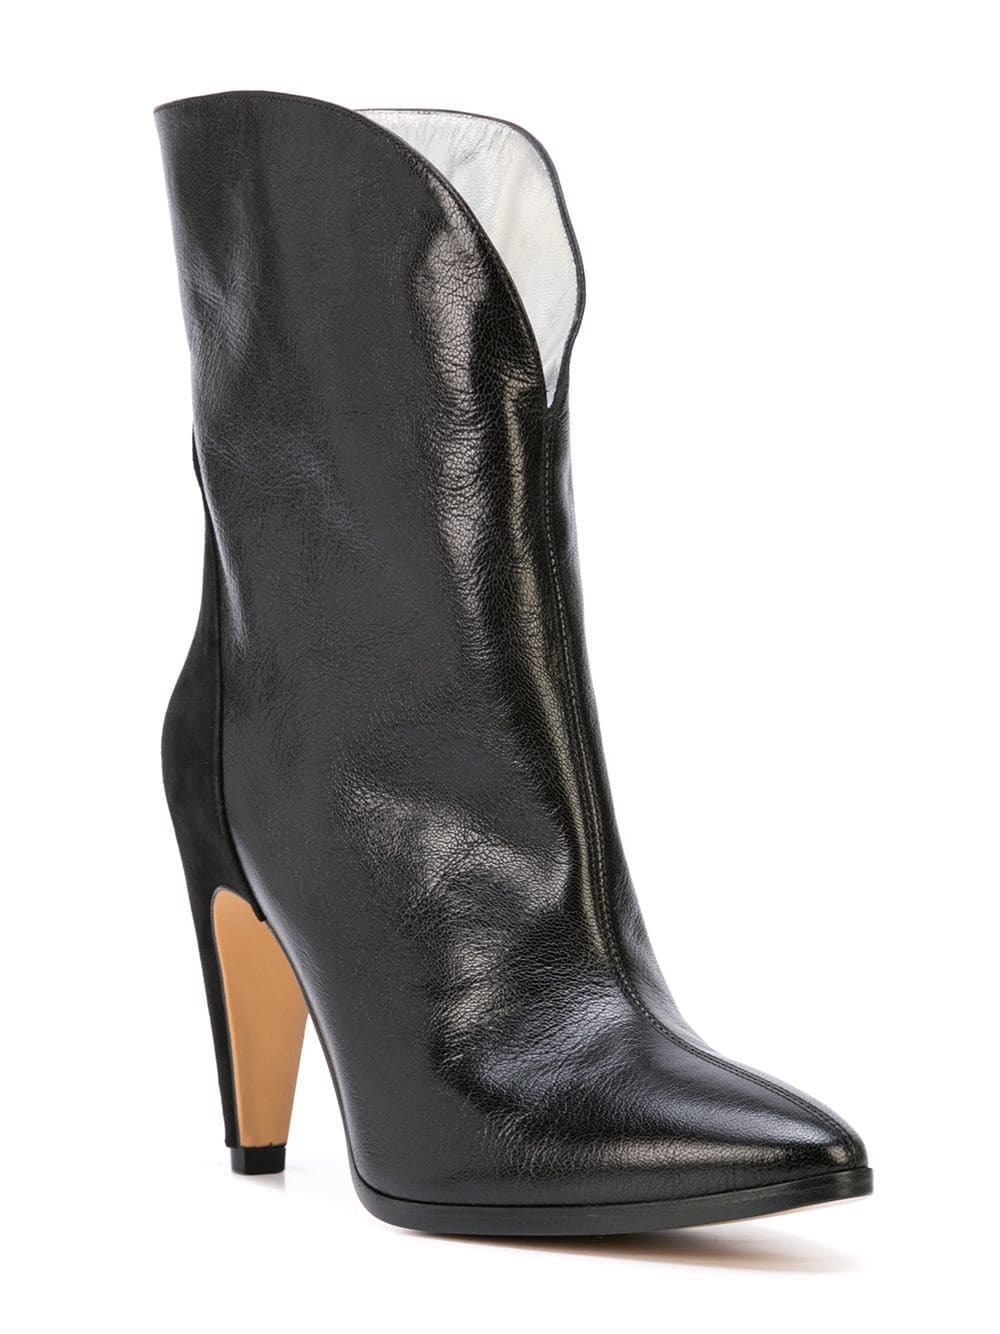 black leather mid heel ankle boots